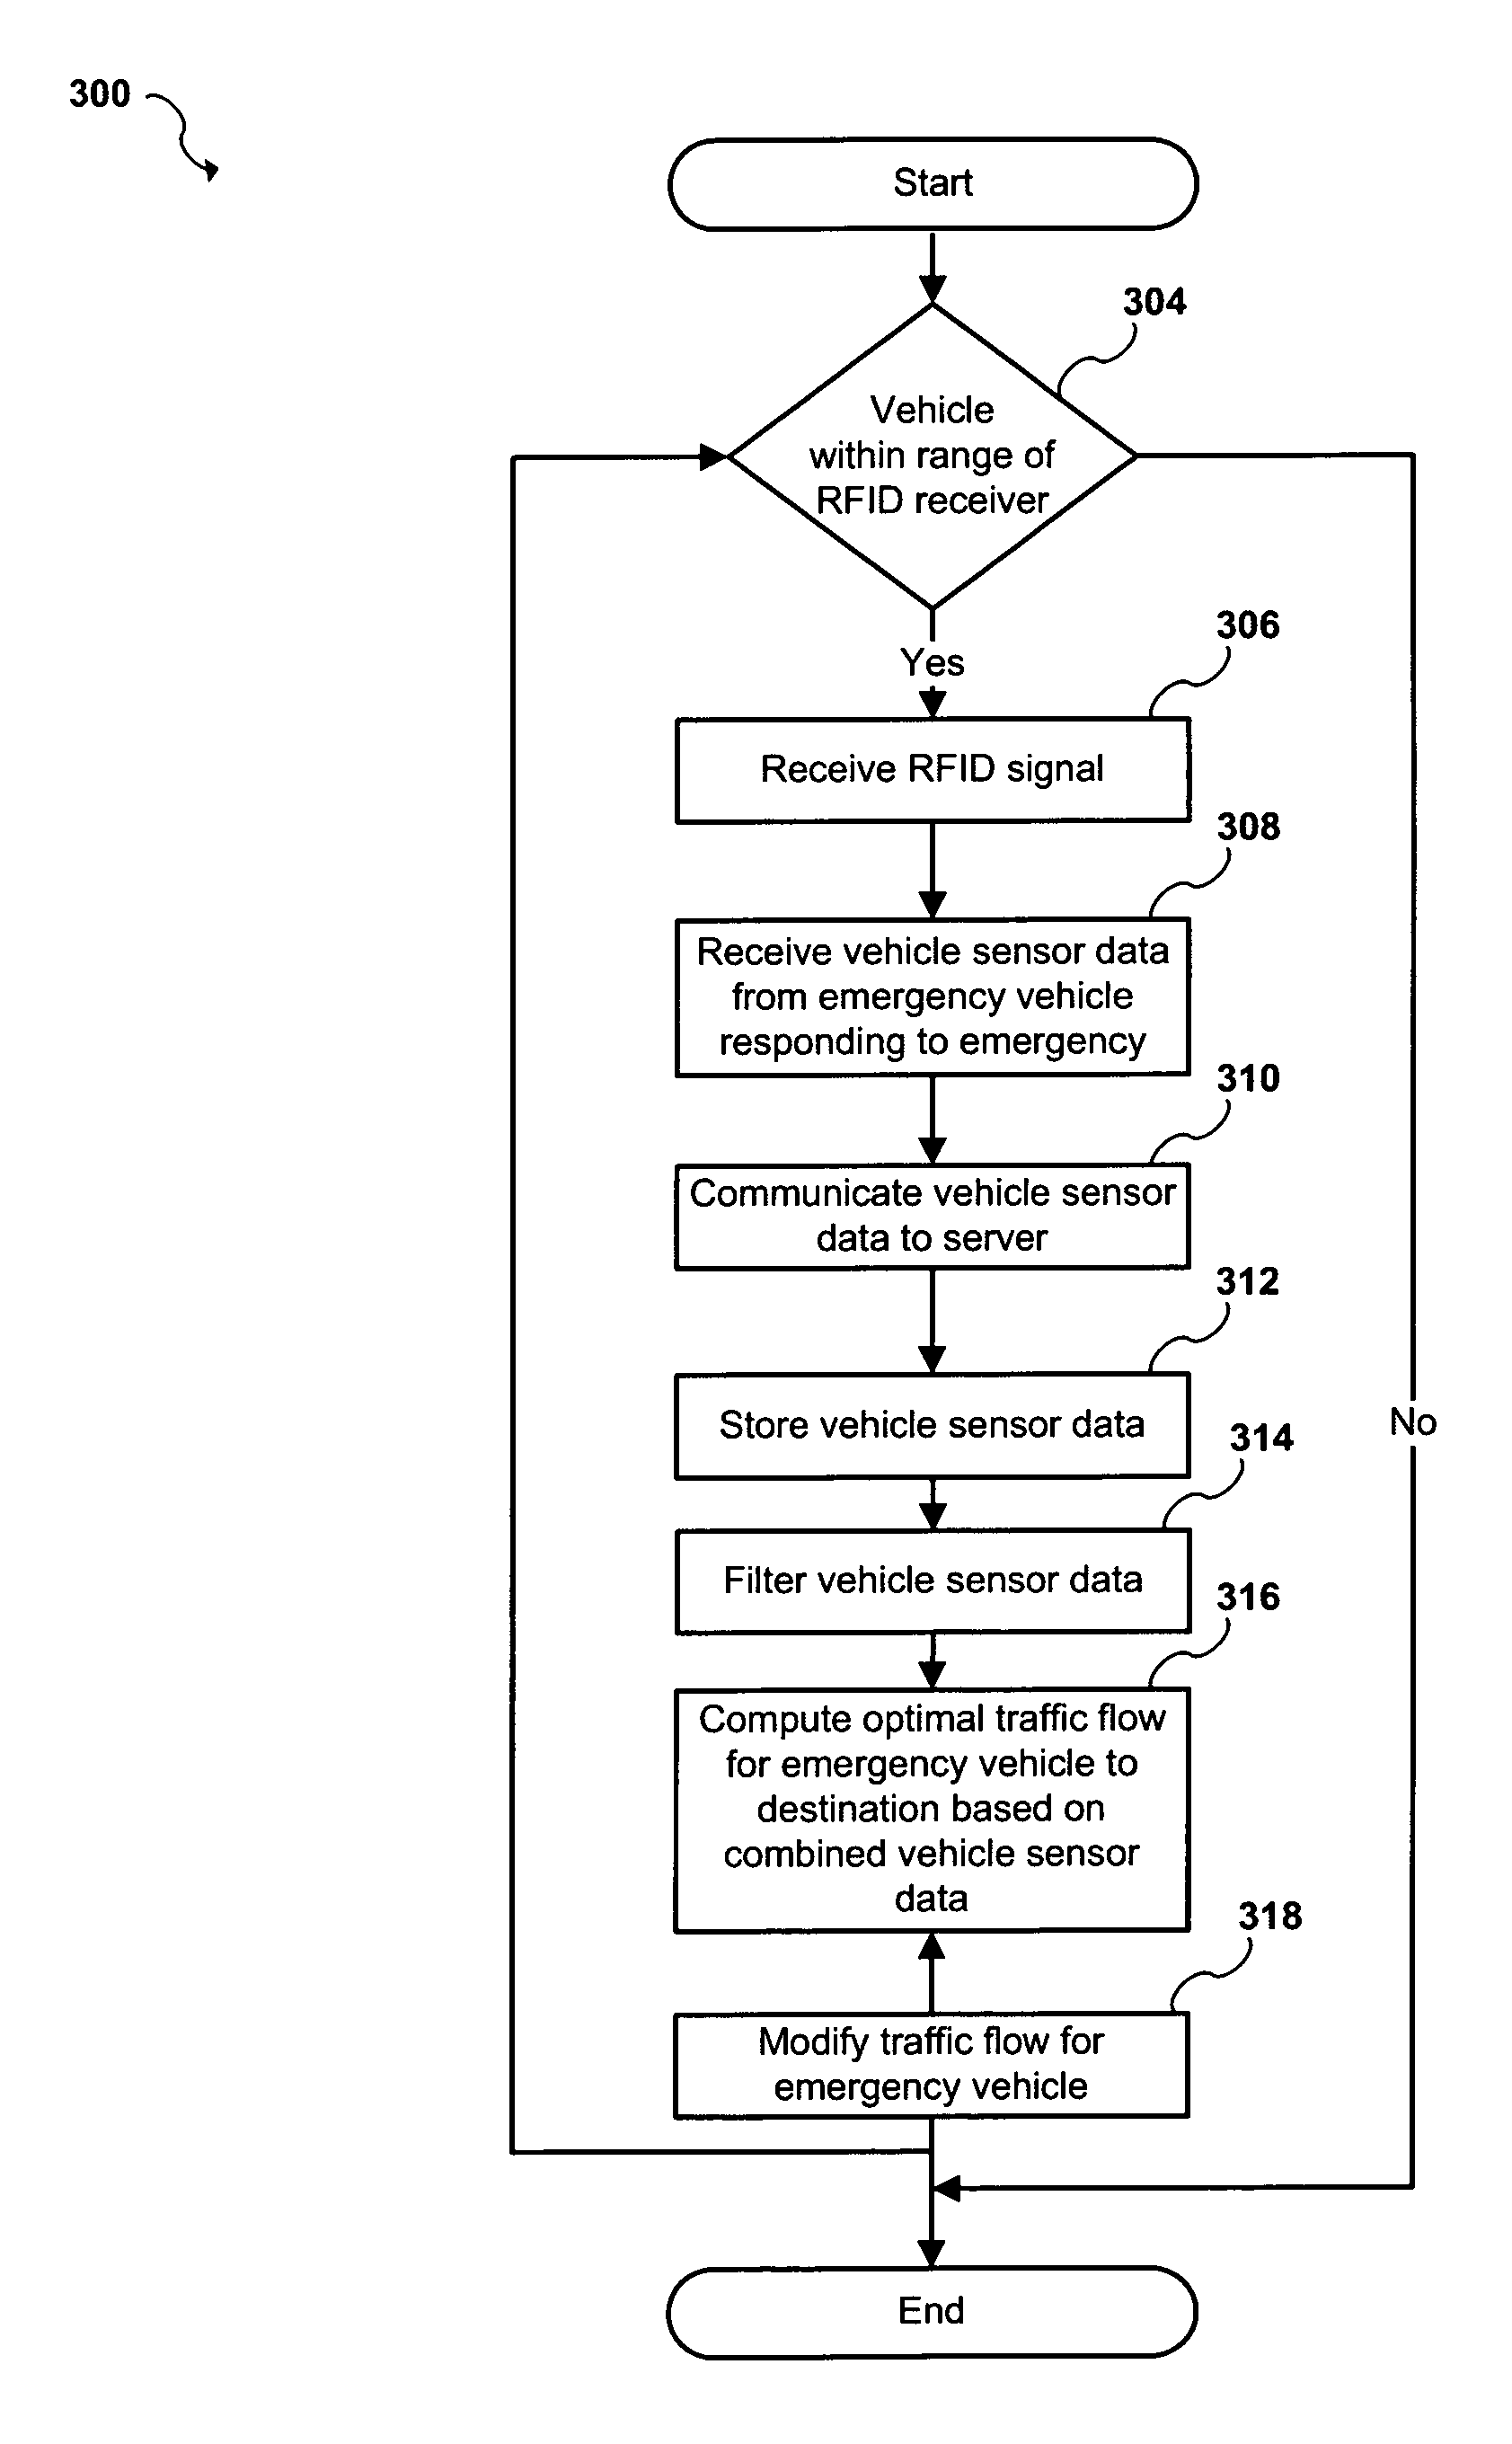 Apparatus and system for monitoring and managing traffic flow